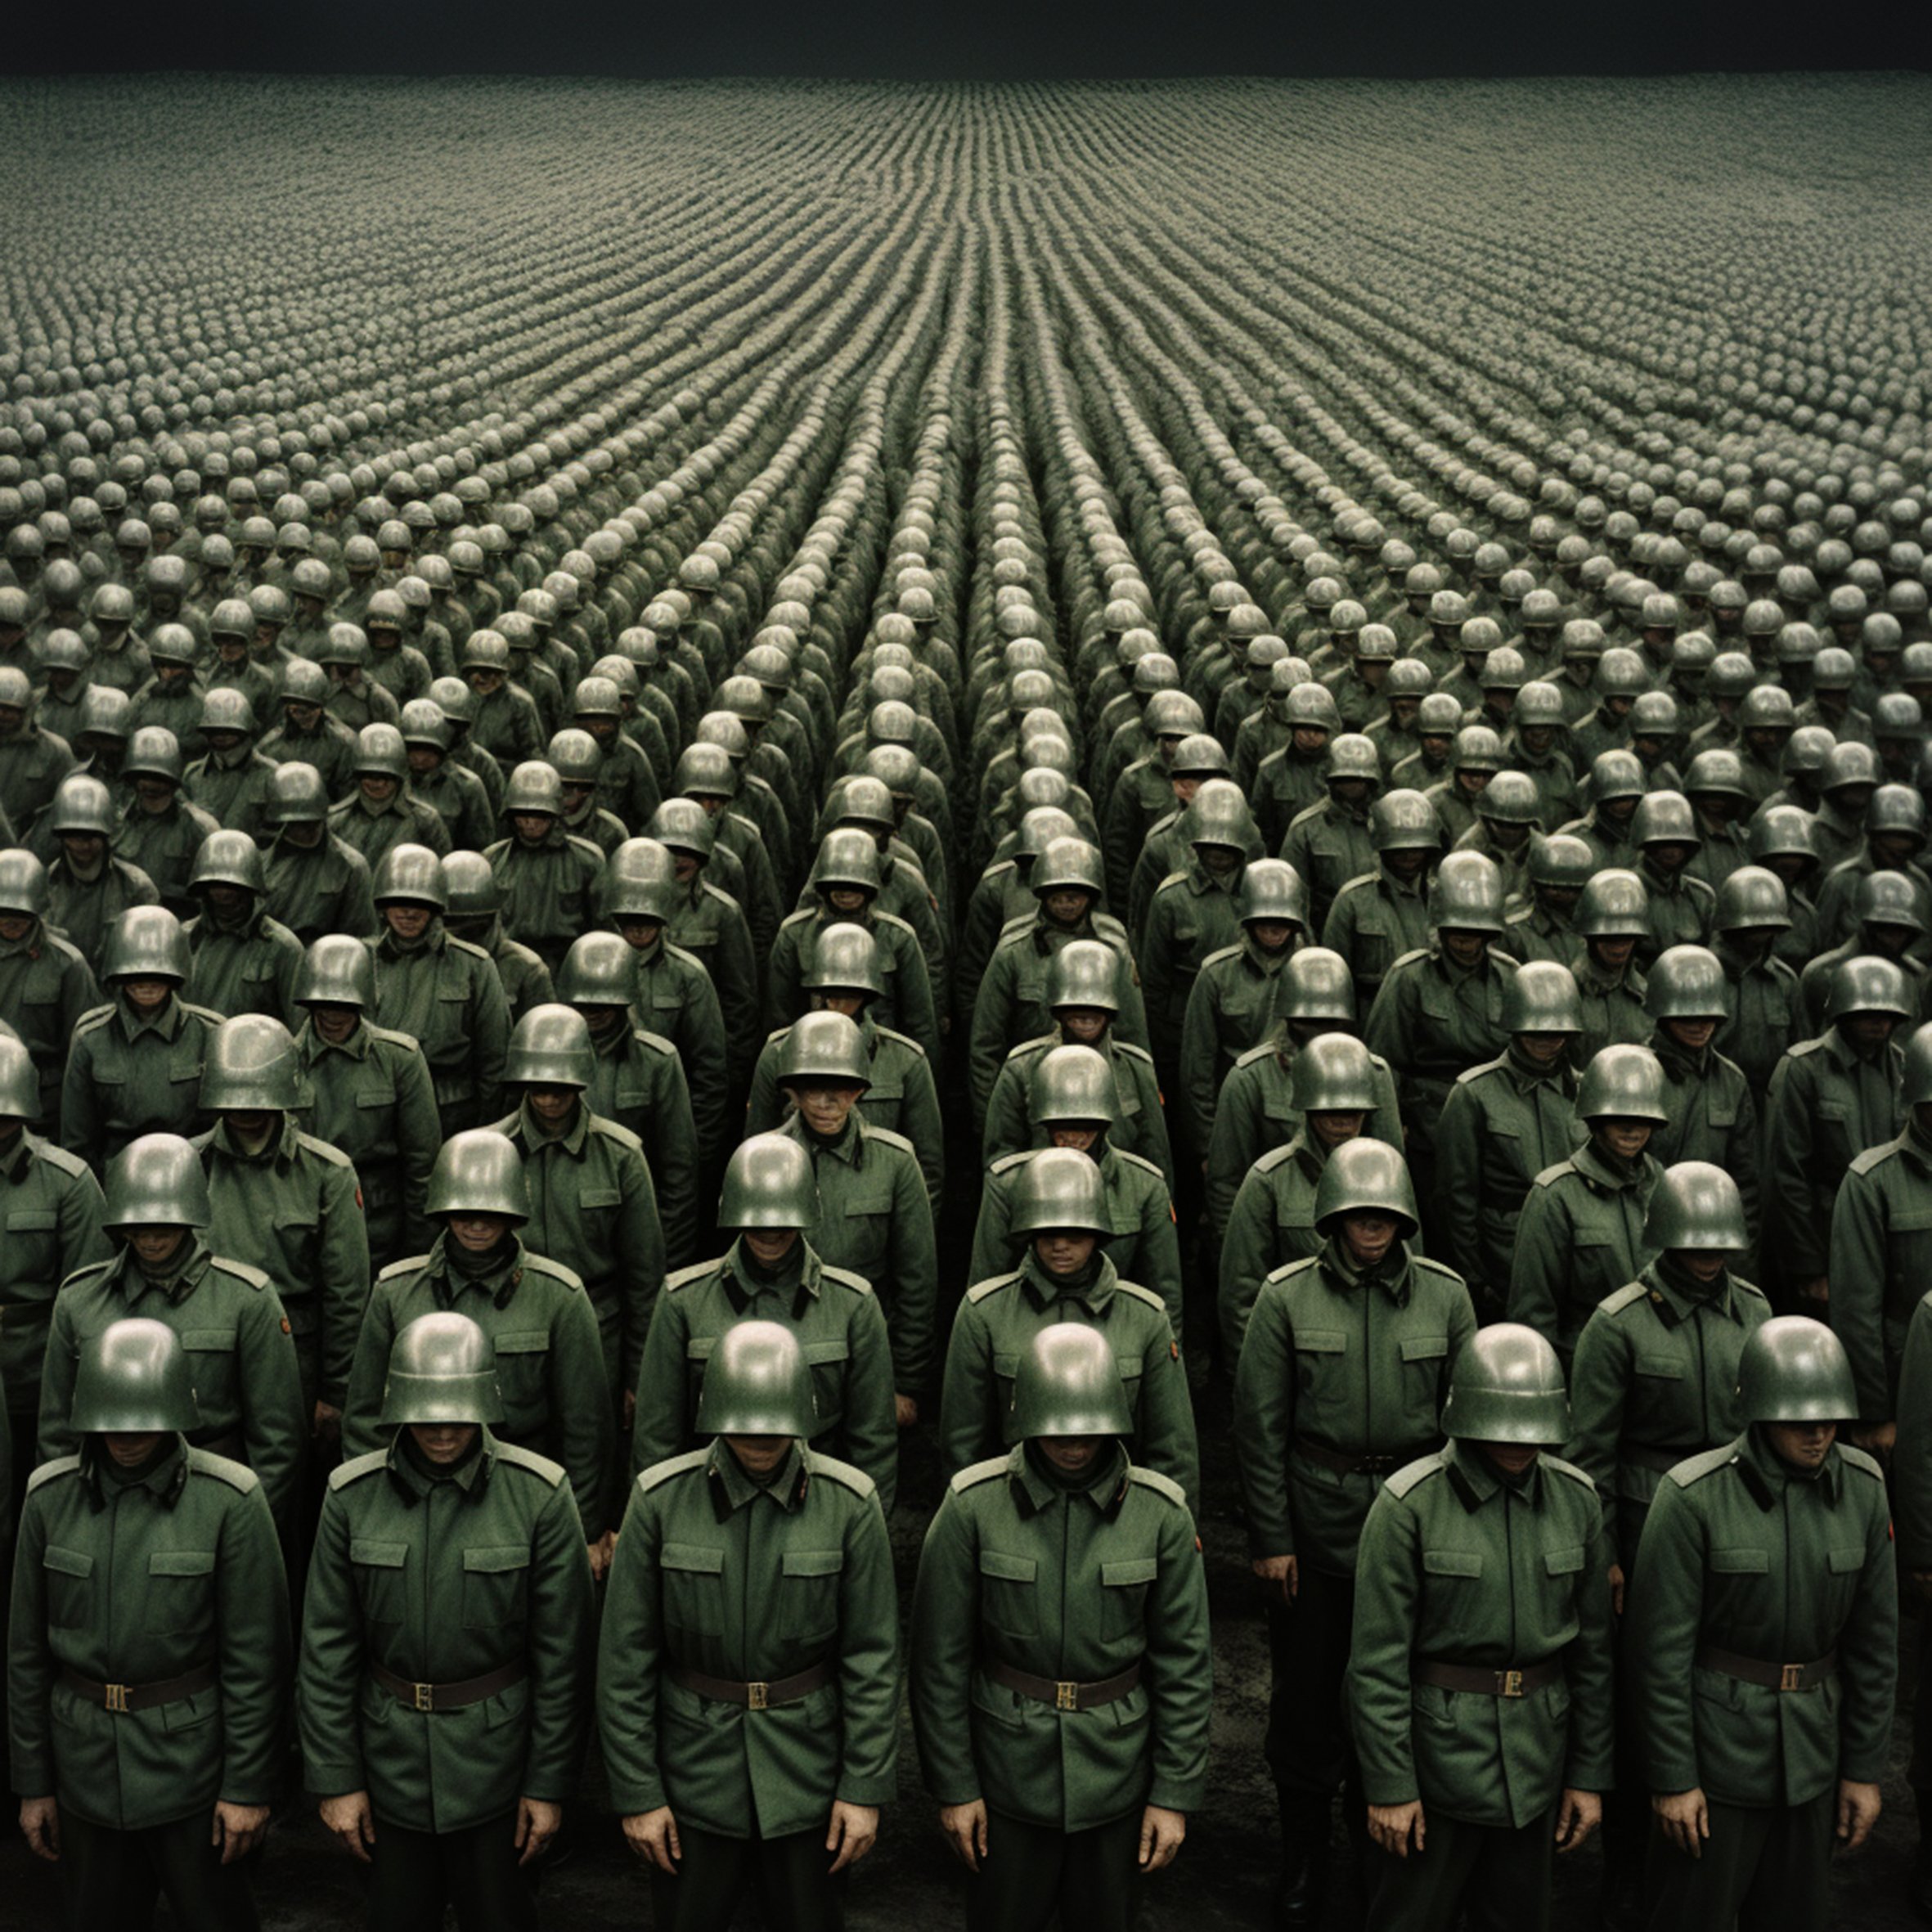 monoblau_russian_army_stock_artwork_by_Andreas_Gursky_359dc881-9d4c-4c80-932c-a84108204292a.jpg